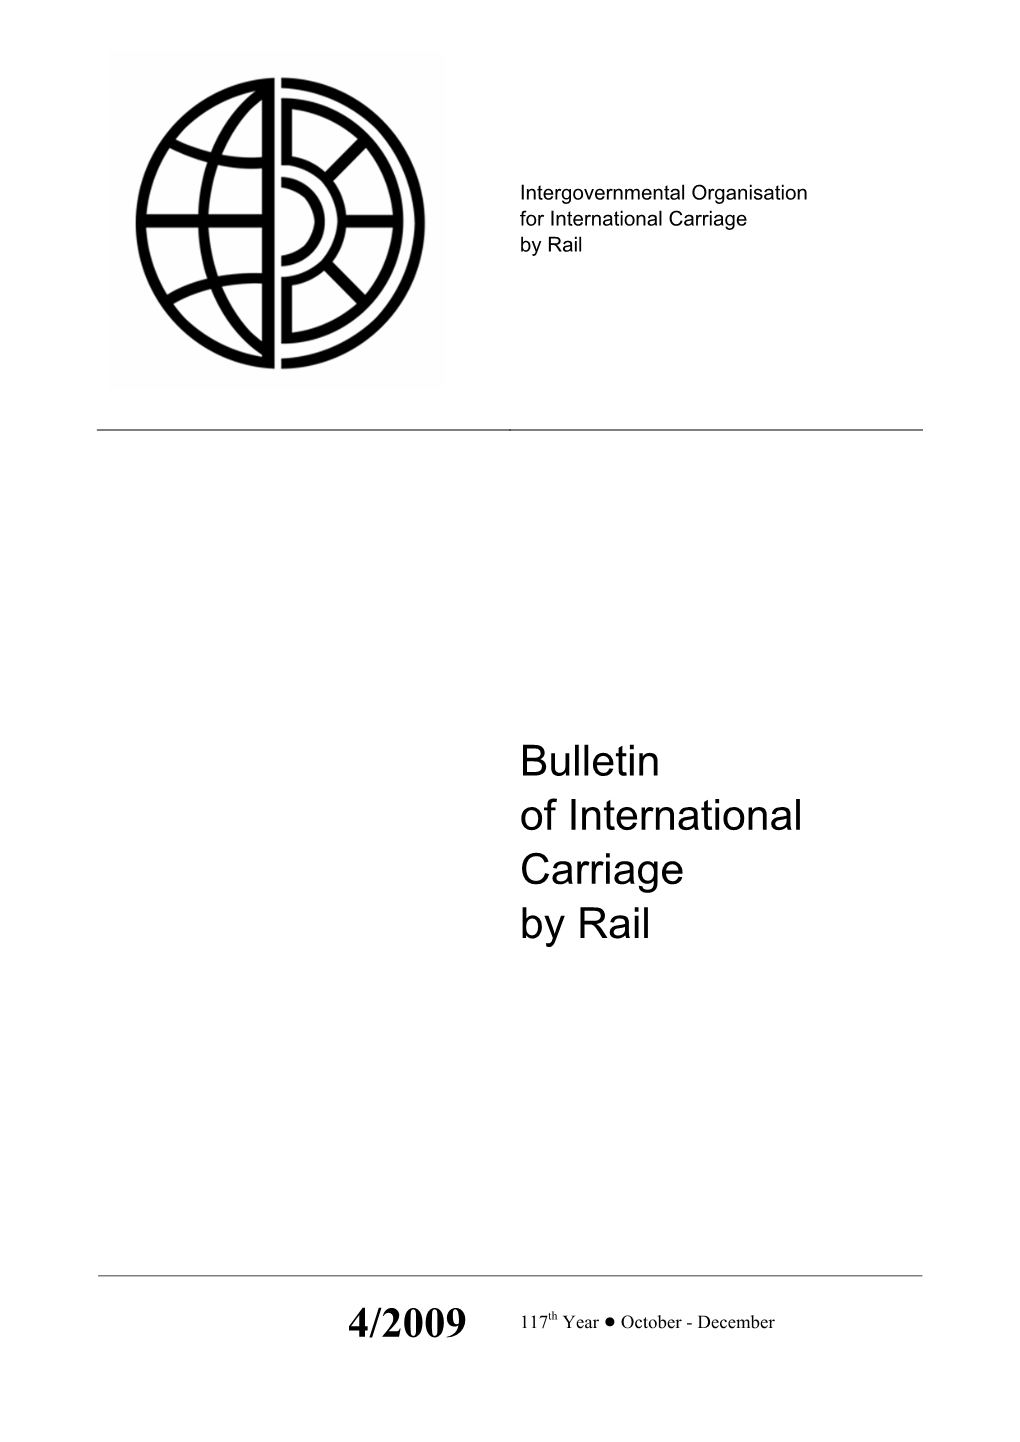 Bulletin of International Carriage by Rail